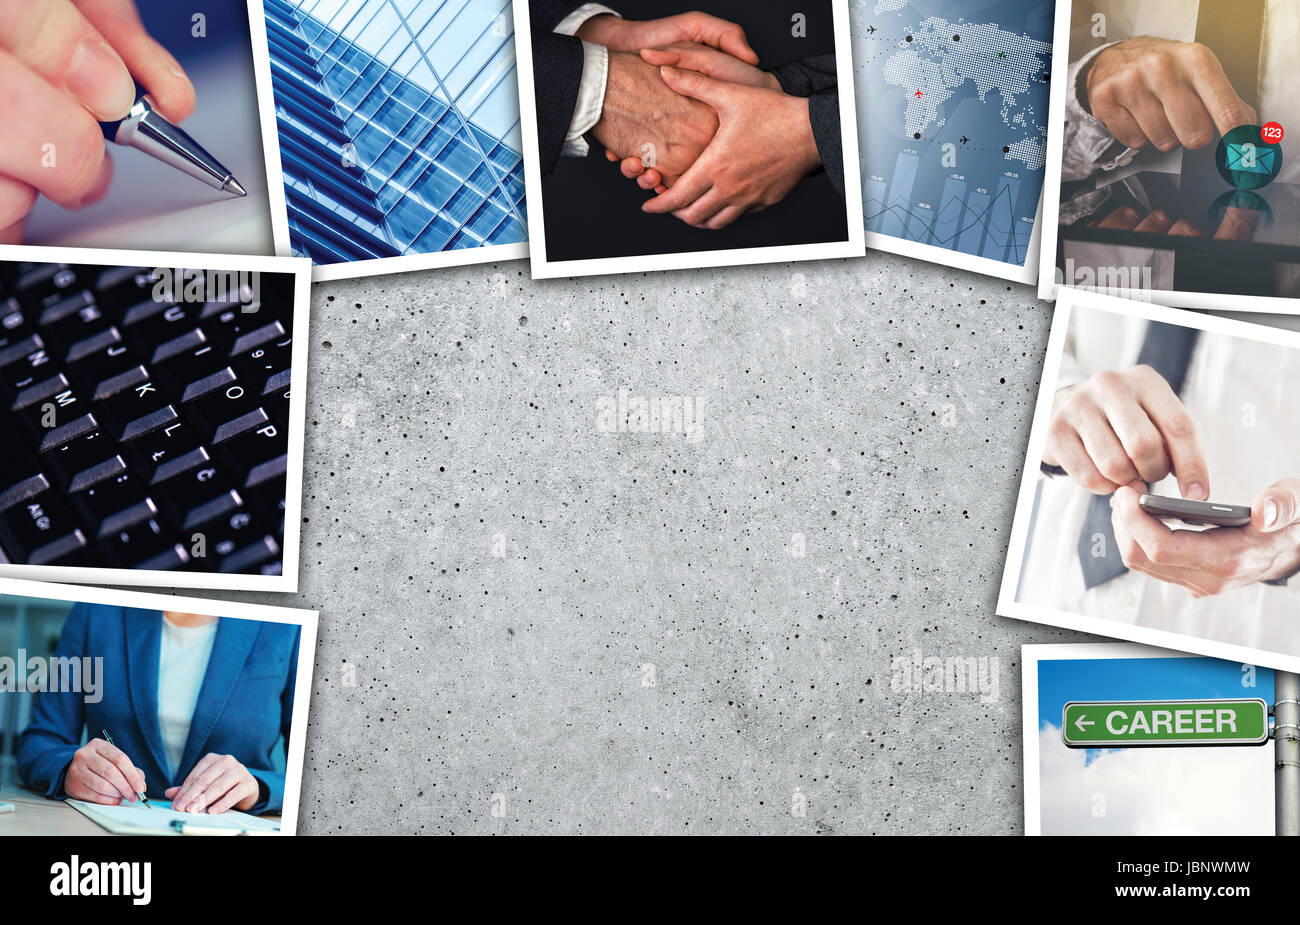 Business and entrepreneurship photo collage over gray concrete background Stock Photo